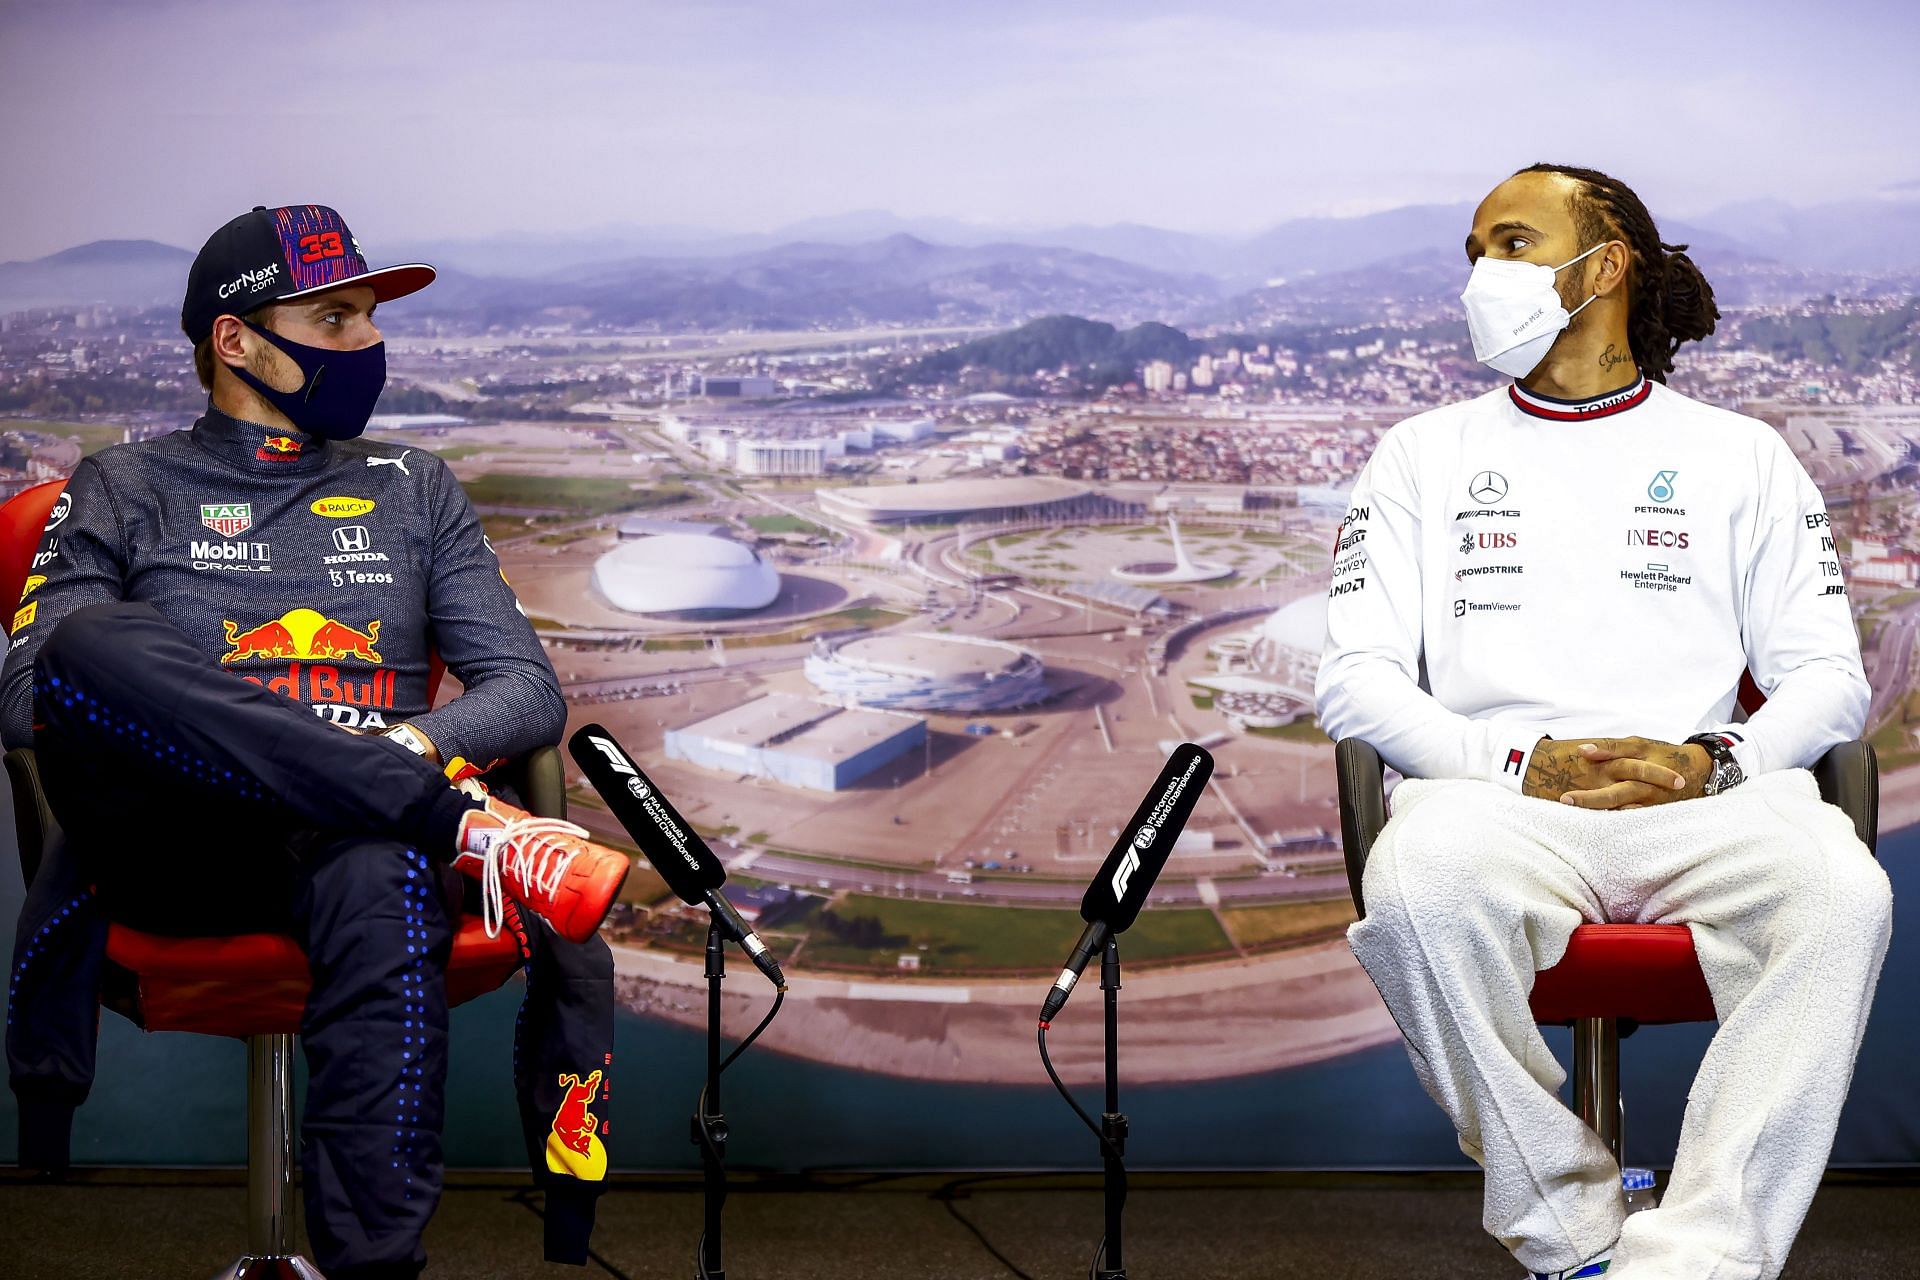 Lewis Hamilton and Max Verstappen talk in the press conference after the F1 Grand Prix of Russia in Sochi. (Photo by Andy Hone - Pool/Getty Images)